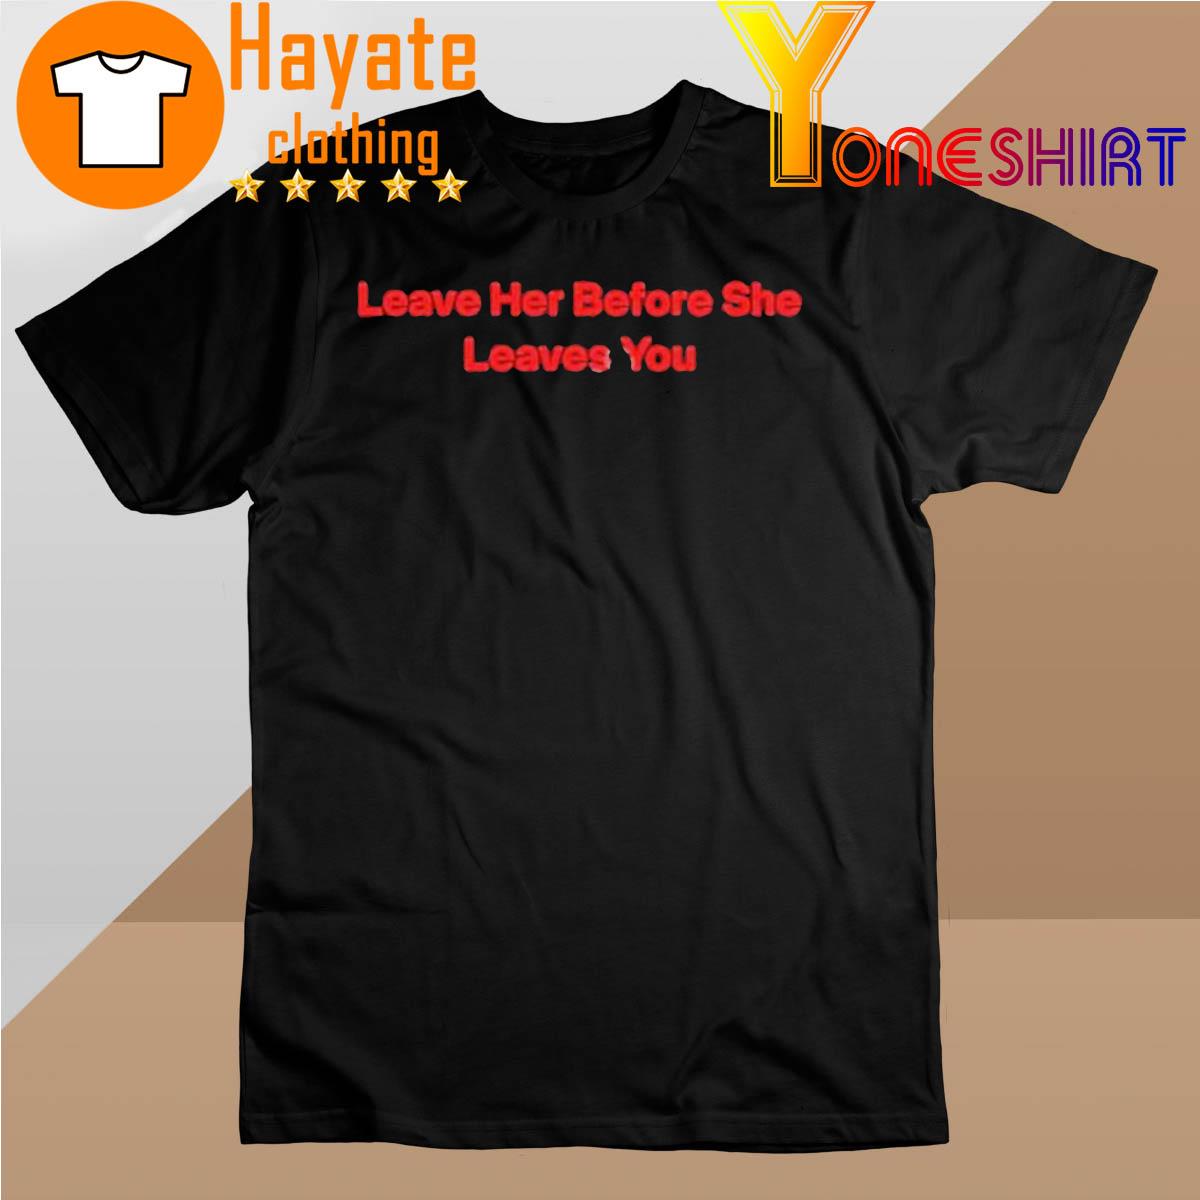 Leave Her Before She Leaves You shirt